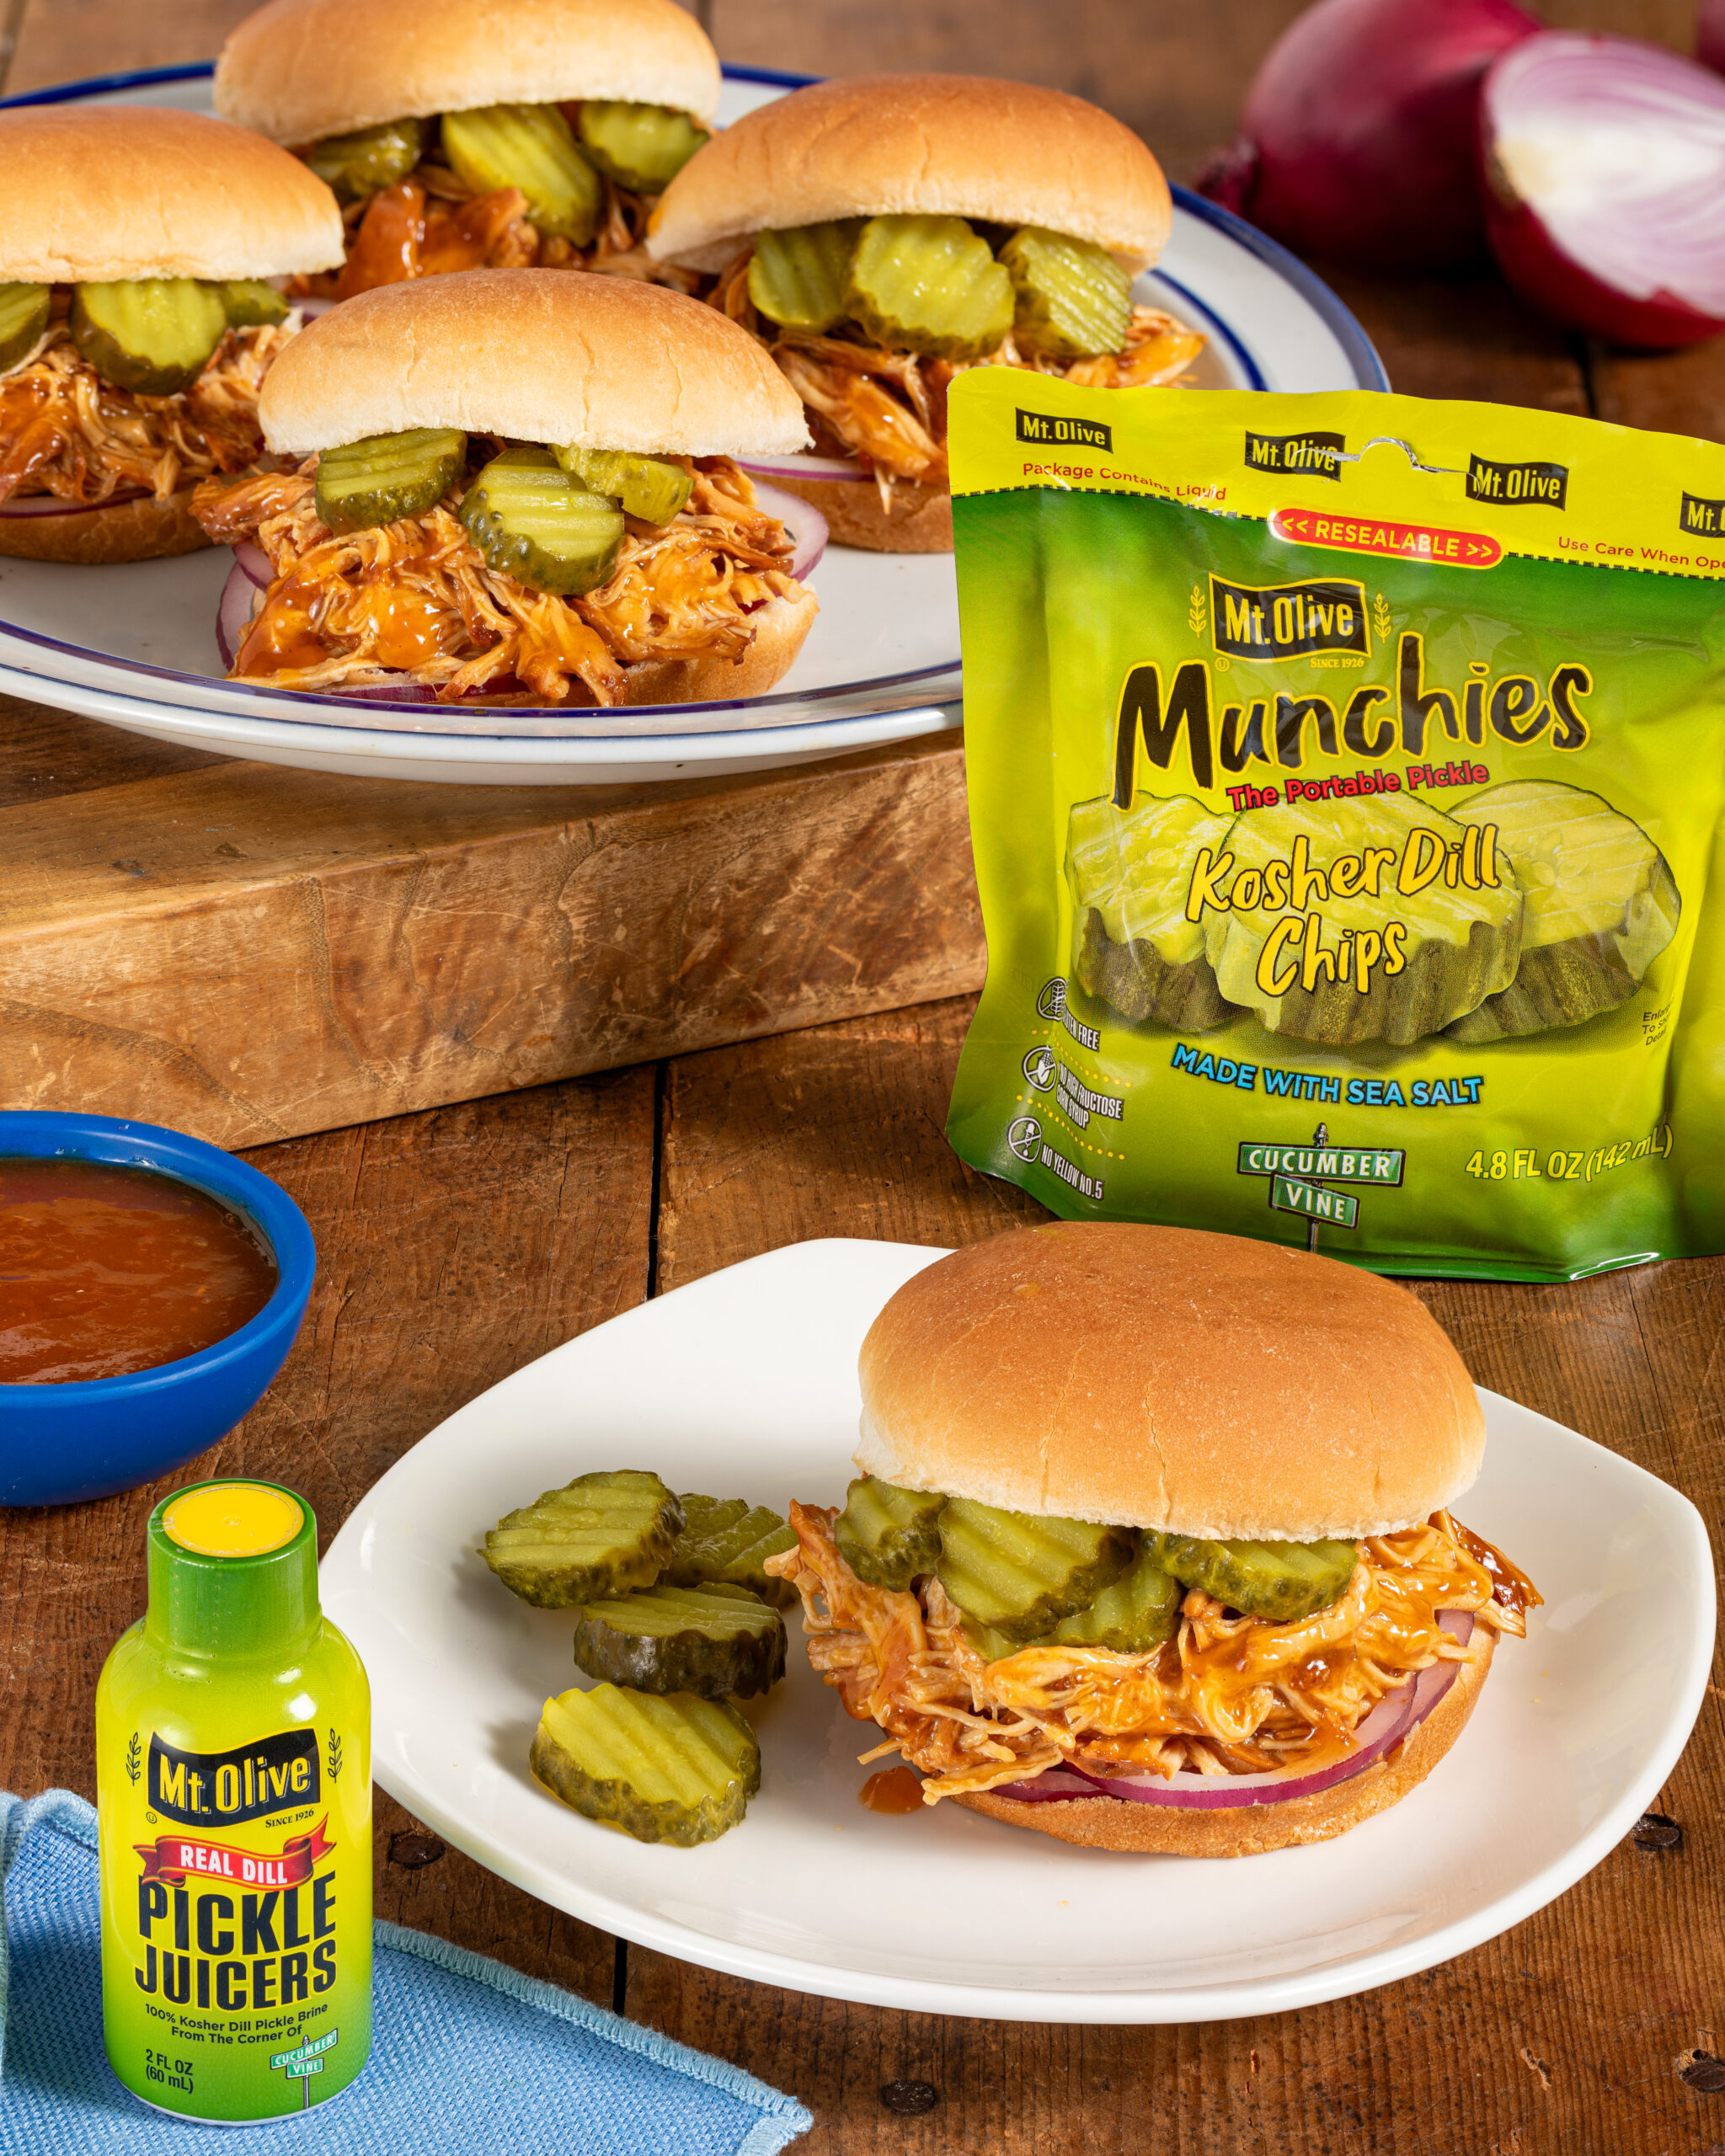 wood table. background shows multiple pulled chicken sliders on buns with pickles. Pouch of portable Munchies Pickles Kosher Dill Chips. White plate shows close up of pulled chicken sandwich topped with pickles. blue dish of bbq sauce. Pickle Juicer bottle in front.